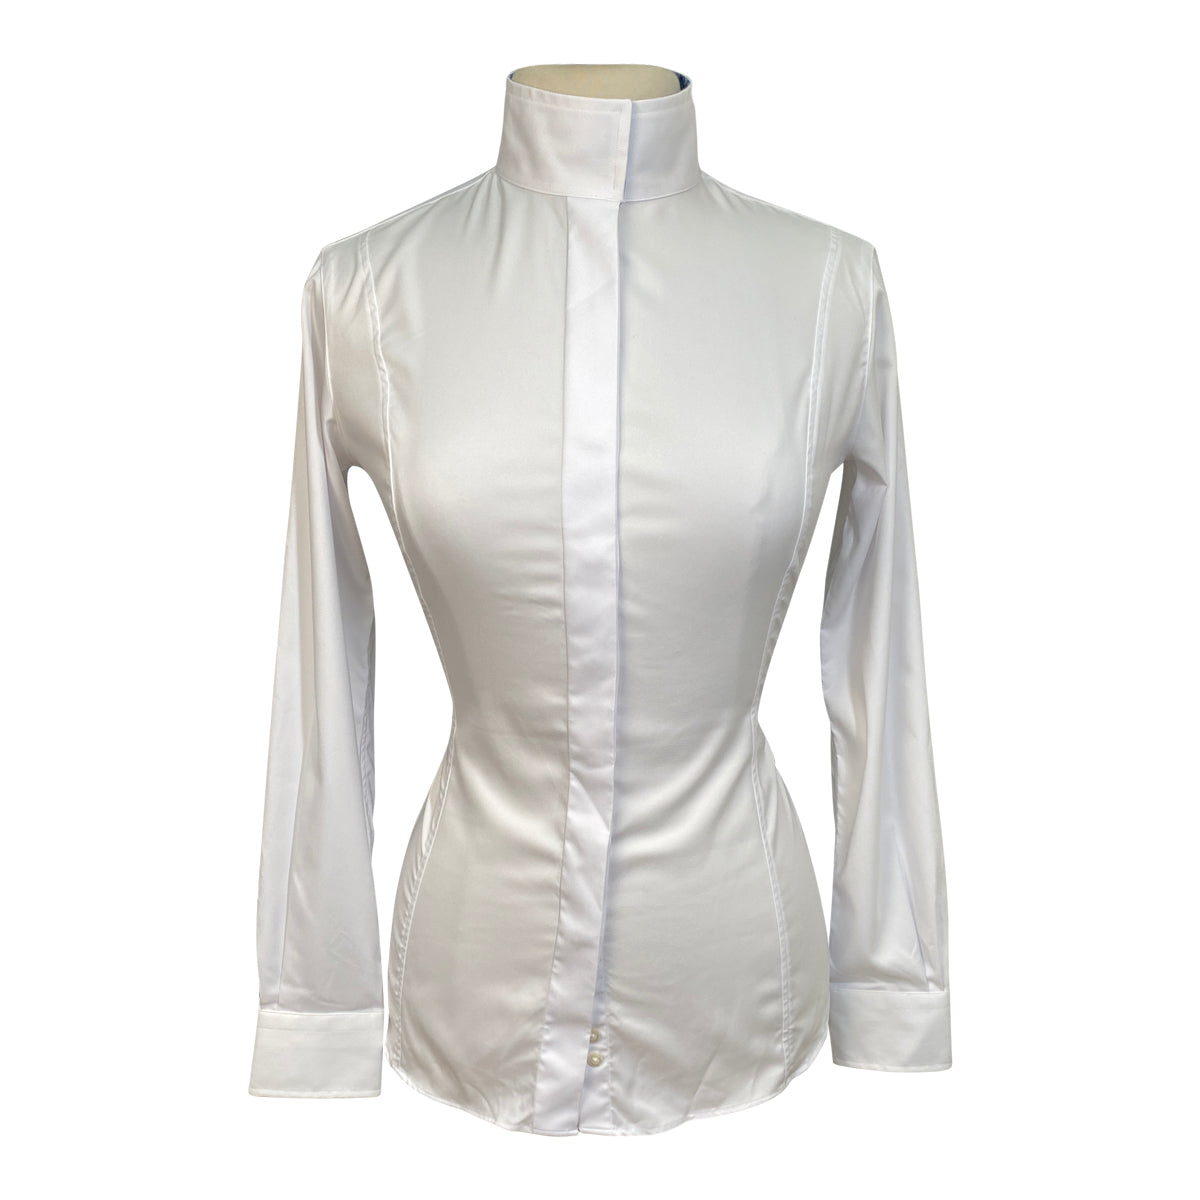 Essex Classics Fitted Wrap Collar Show Shirt in White/Blue